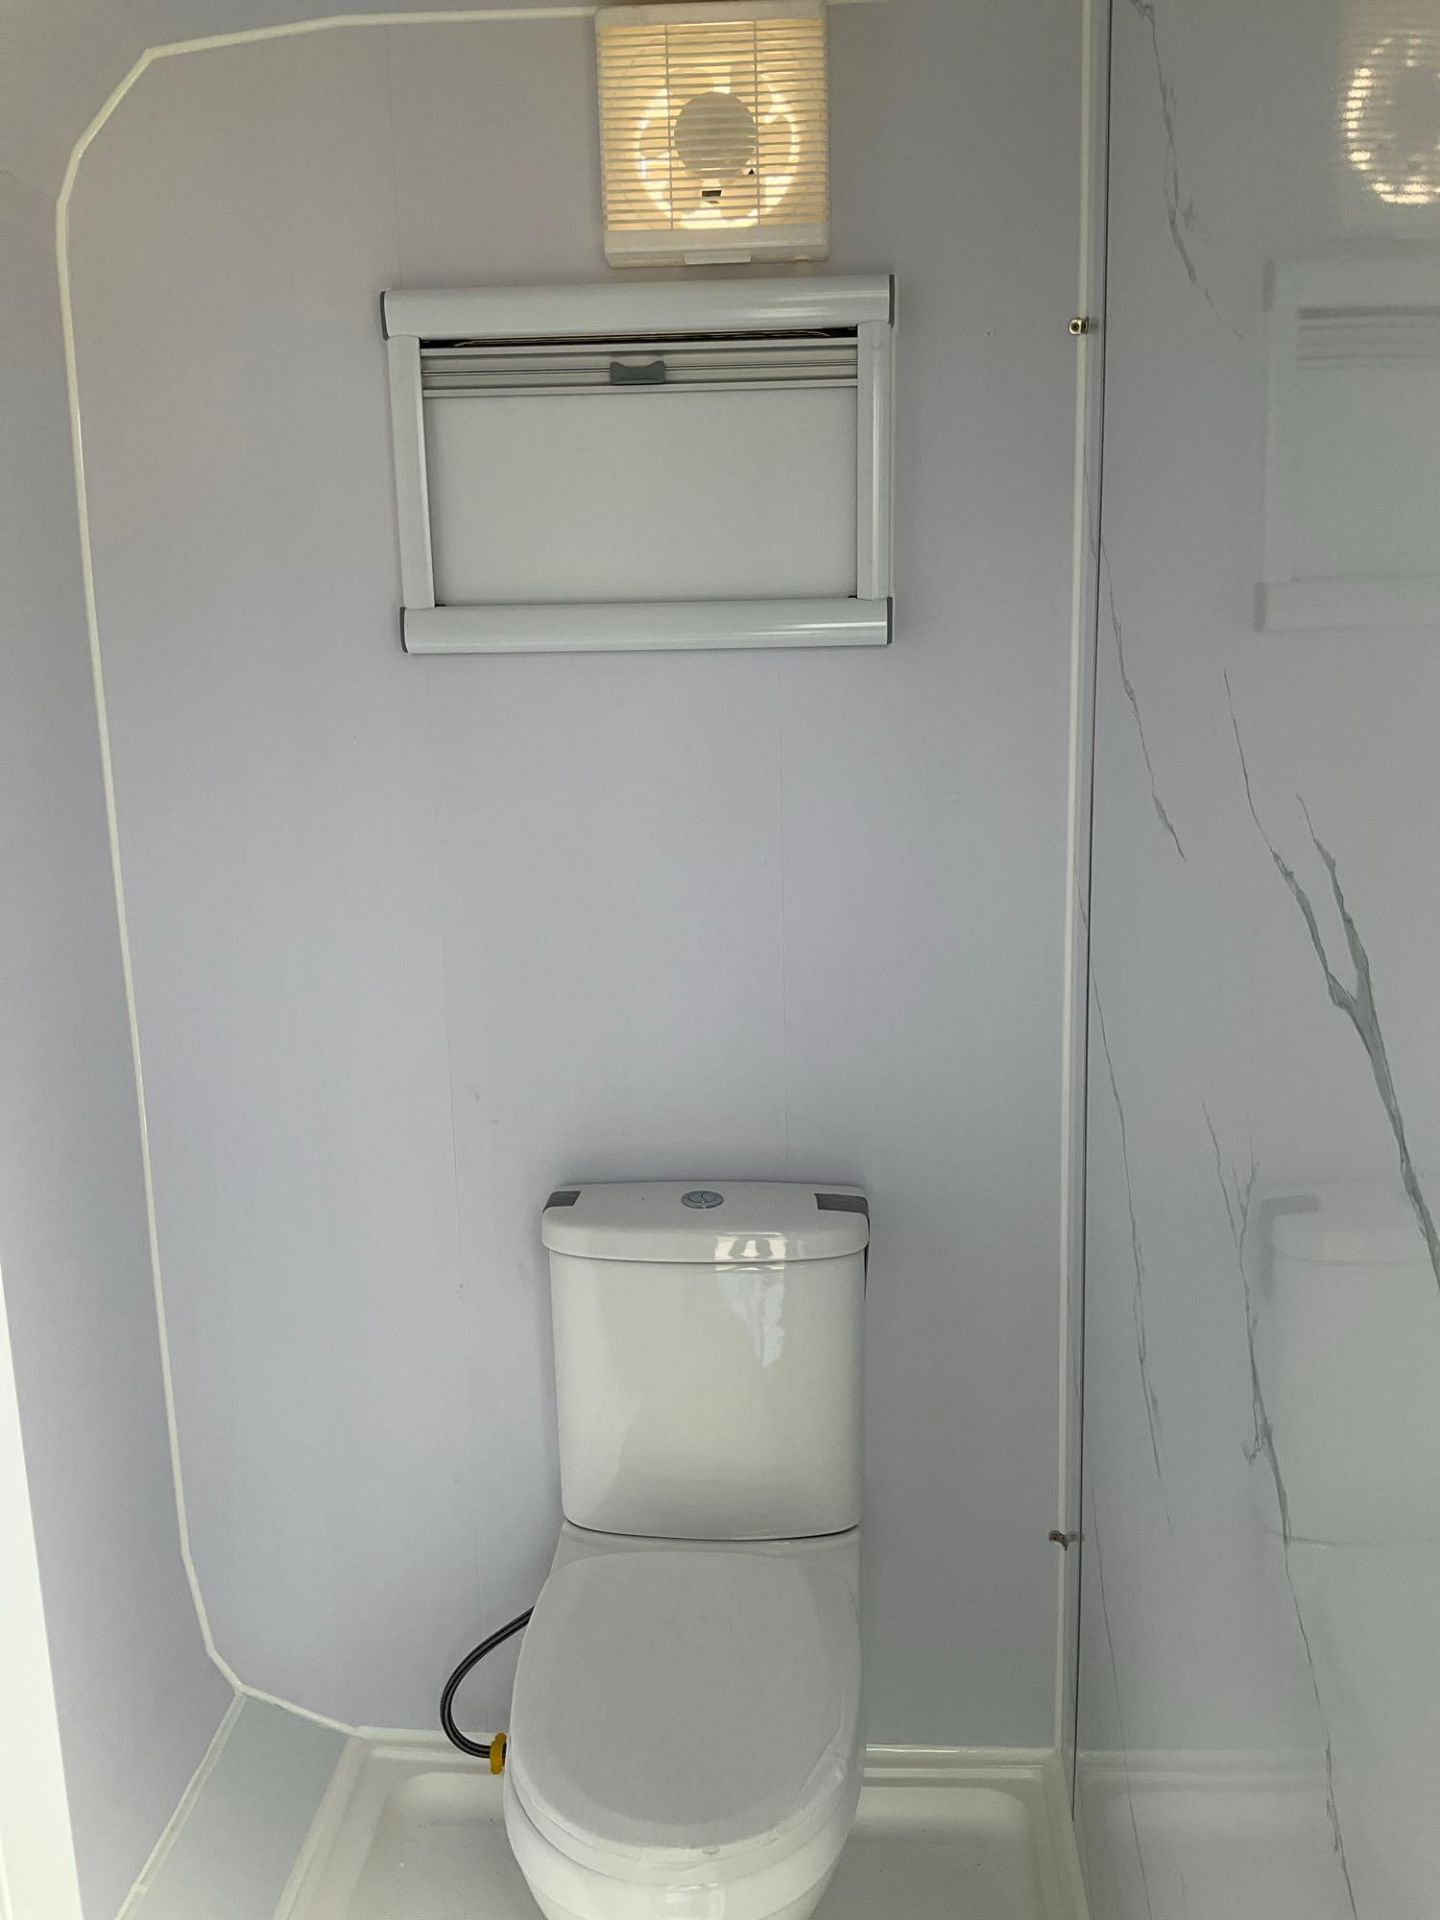 UNUSED 13FT...HOUSE WITH SHOWER ROOM, TOILET, WINDOW, PLUMBING AND ELECTRIC HOOK UP, 110V, LIGHTI... - Bild 17 aus 19